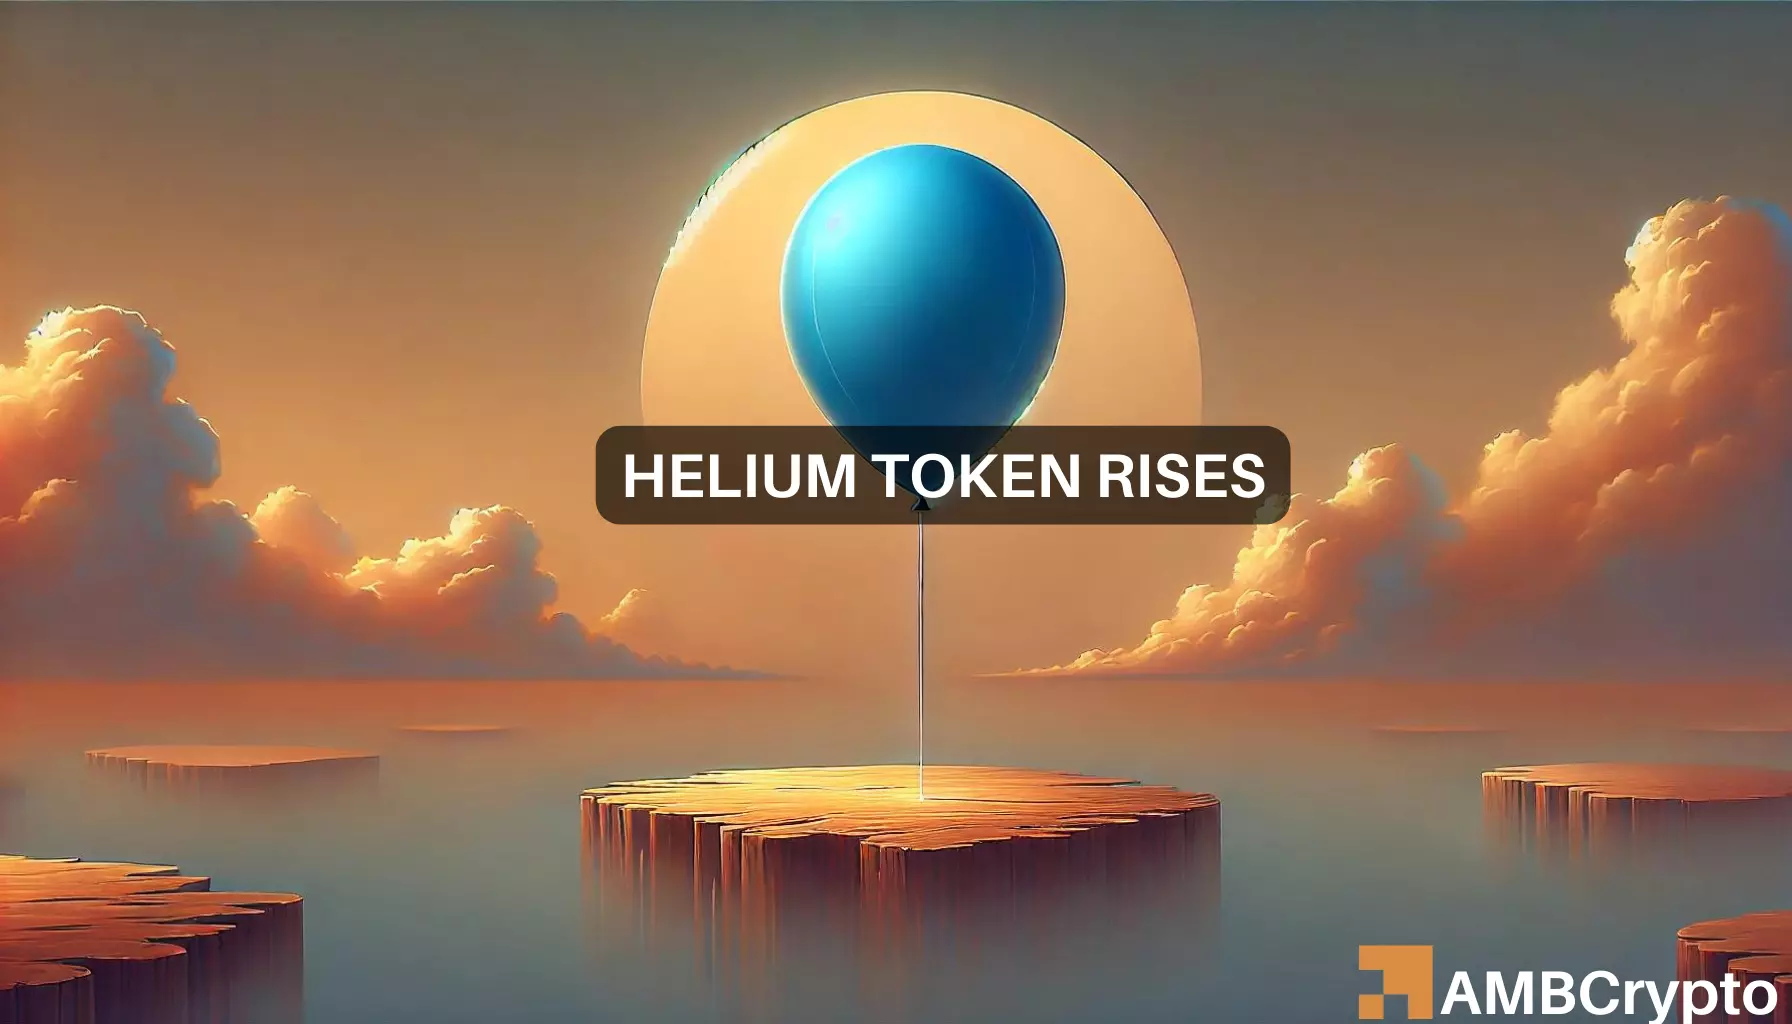 Helium token hits $4.9: What’s driving the sudden uptick?